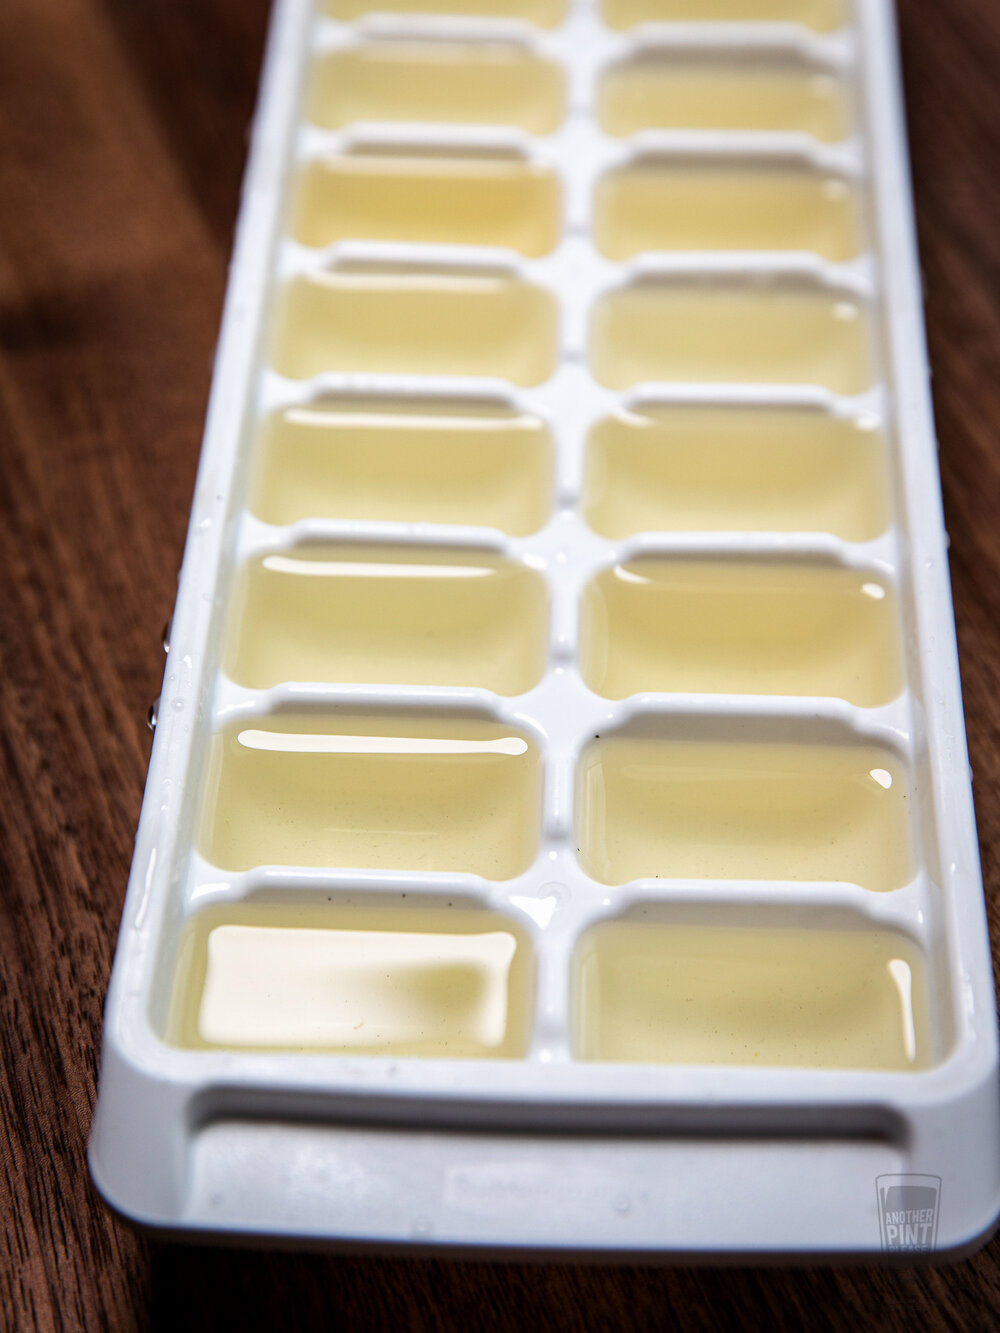 Smoked Water in Ice Cube Tray